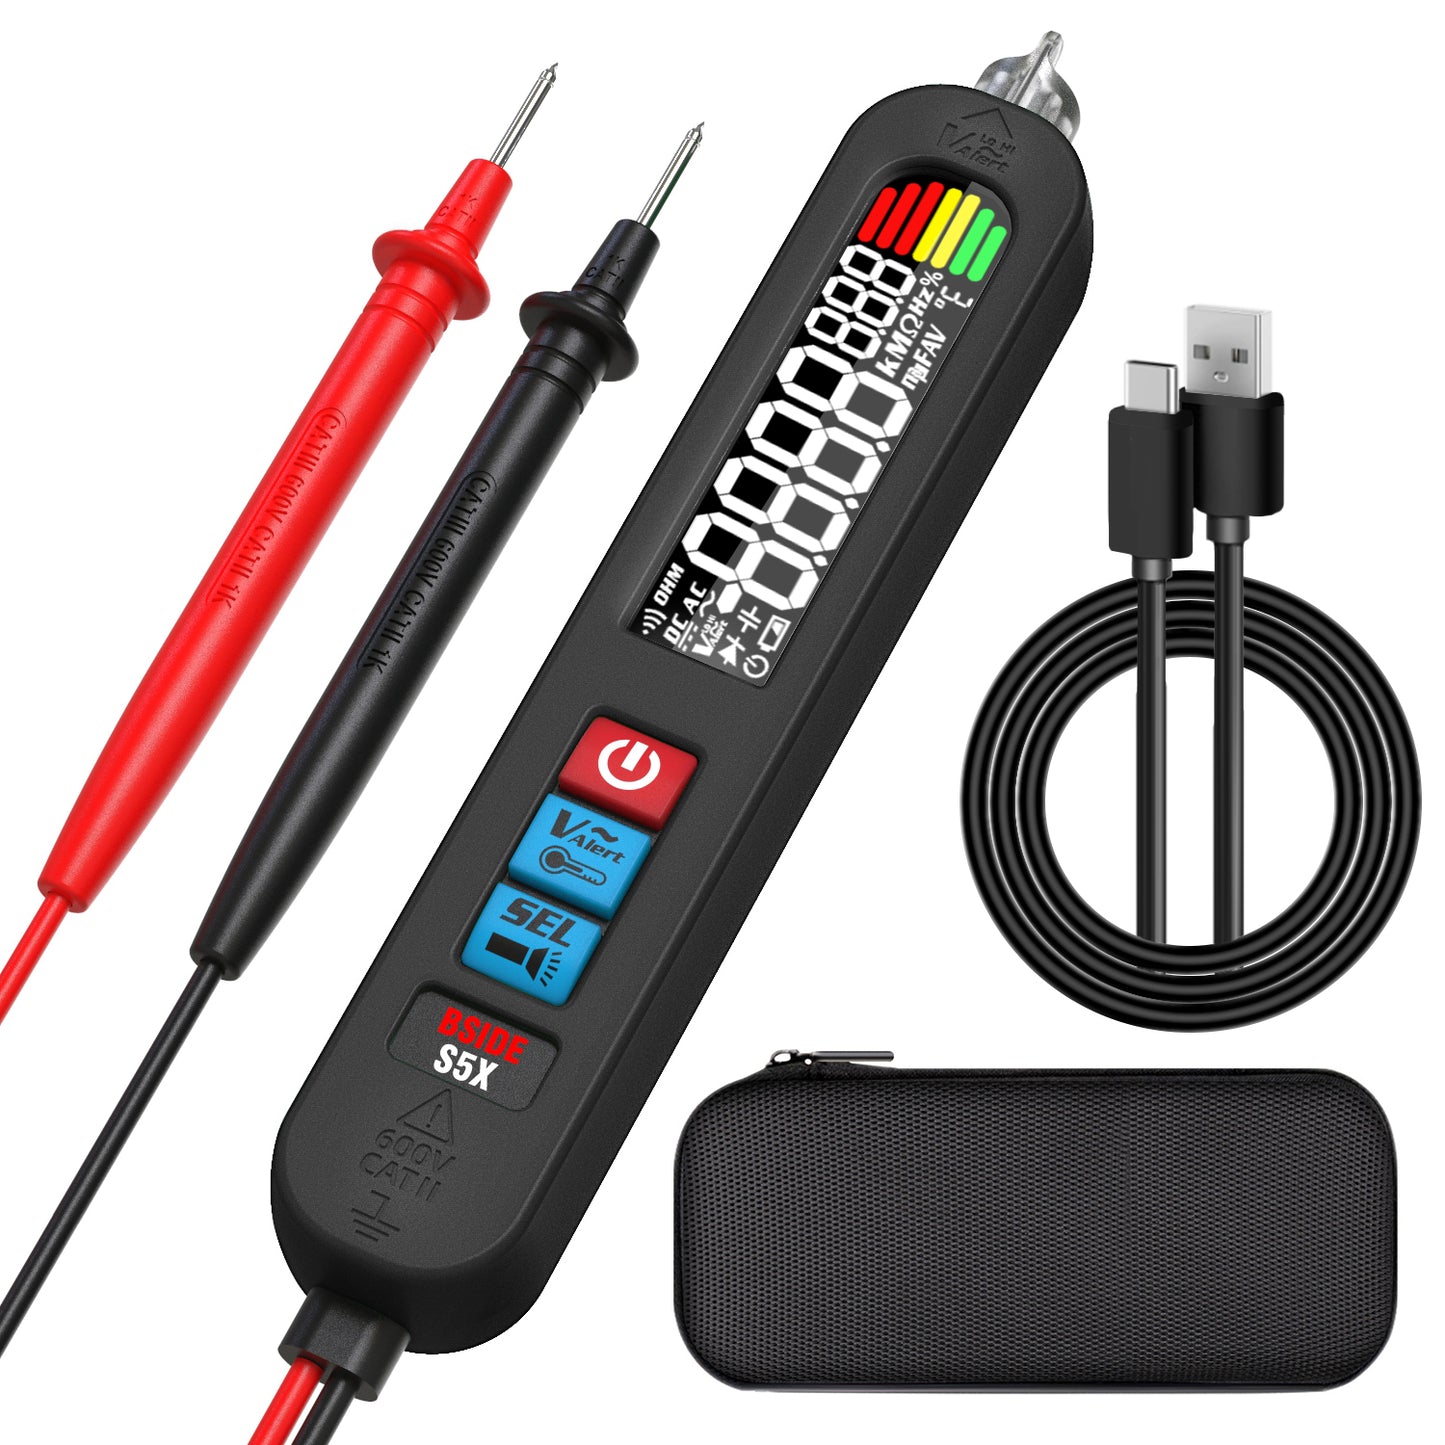 BSIDE Smart Digital Multimeter Rechargeable Pen-Type Electrical Voltage Tester, Measures Capacitance Diode VFC Ohm & Environment Temp with Flashlight